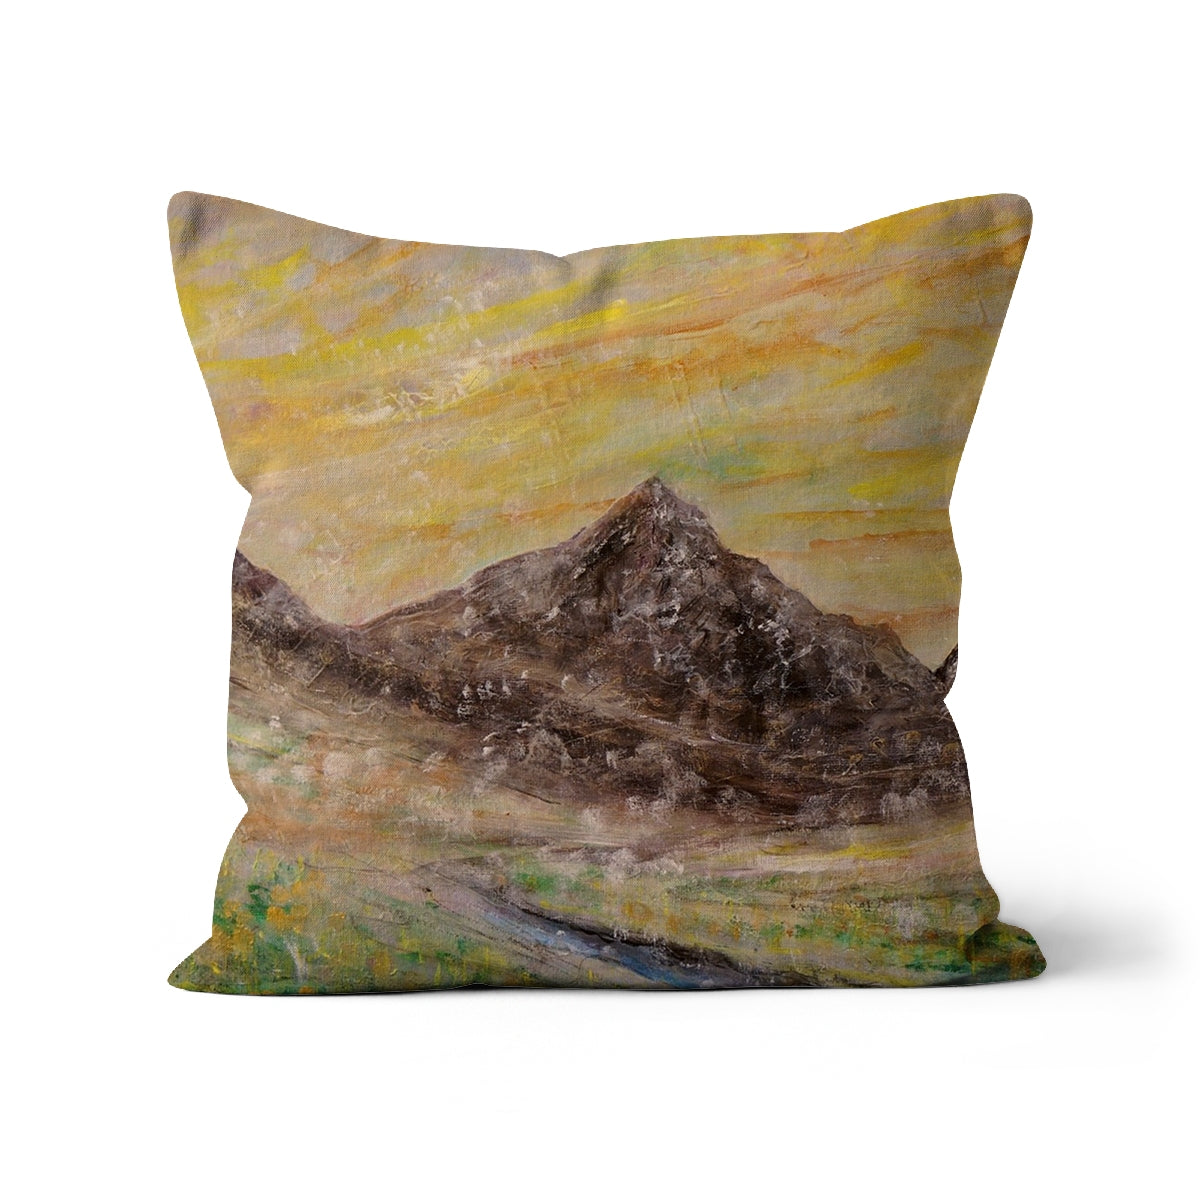 Glen Rosa Mist Arran Art Gifts Cushion-Cushions-Arran Art Gallery-Faux Suede-24"x24"-Paintings, Prints, Homeware, Art Gifts From Scotland By Scottish Artist Kevin Hunter